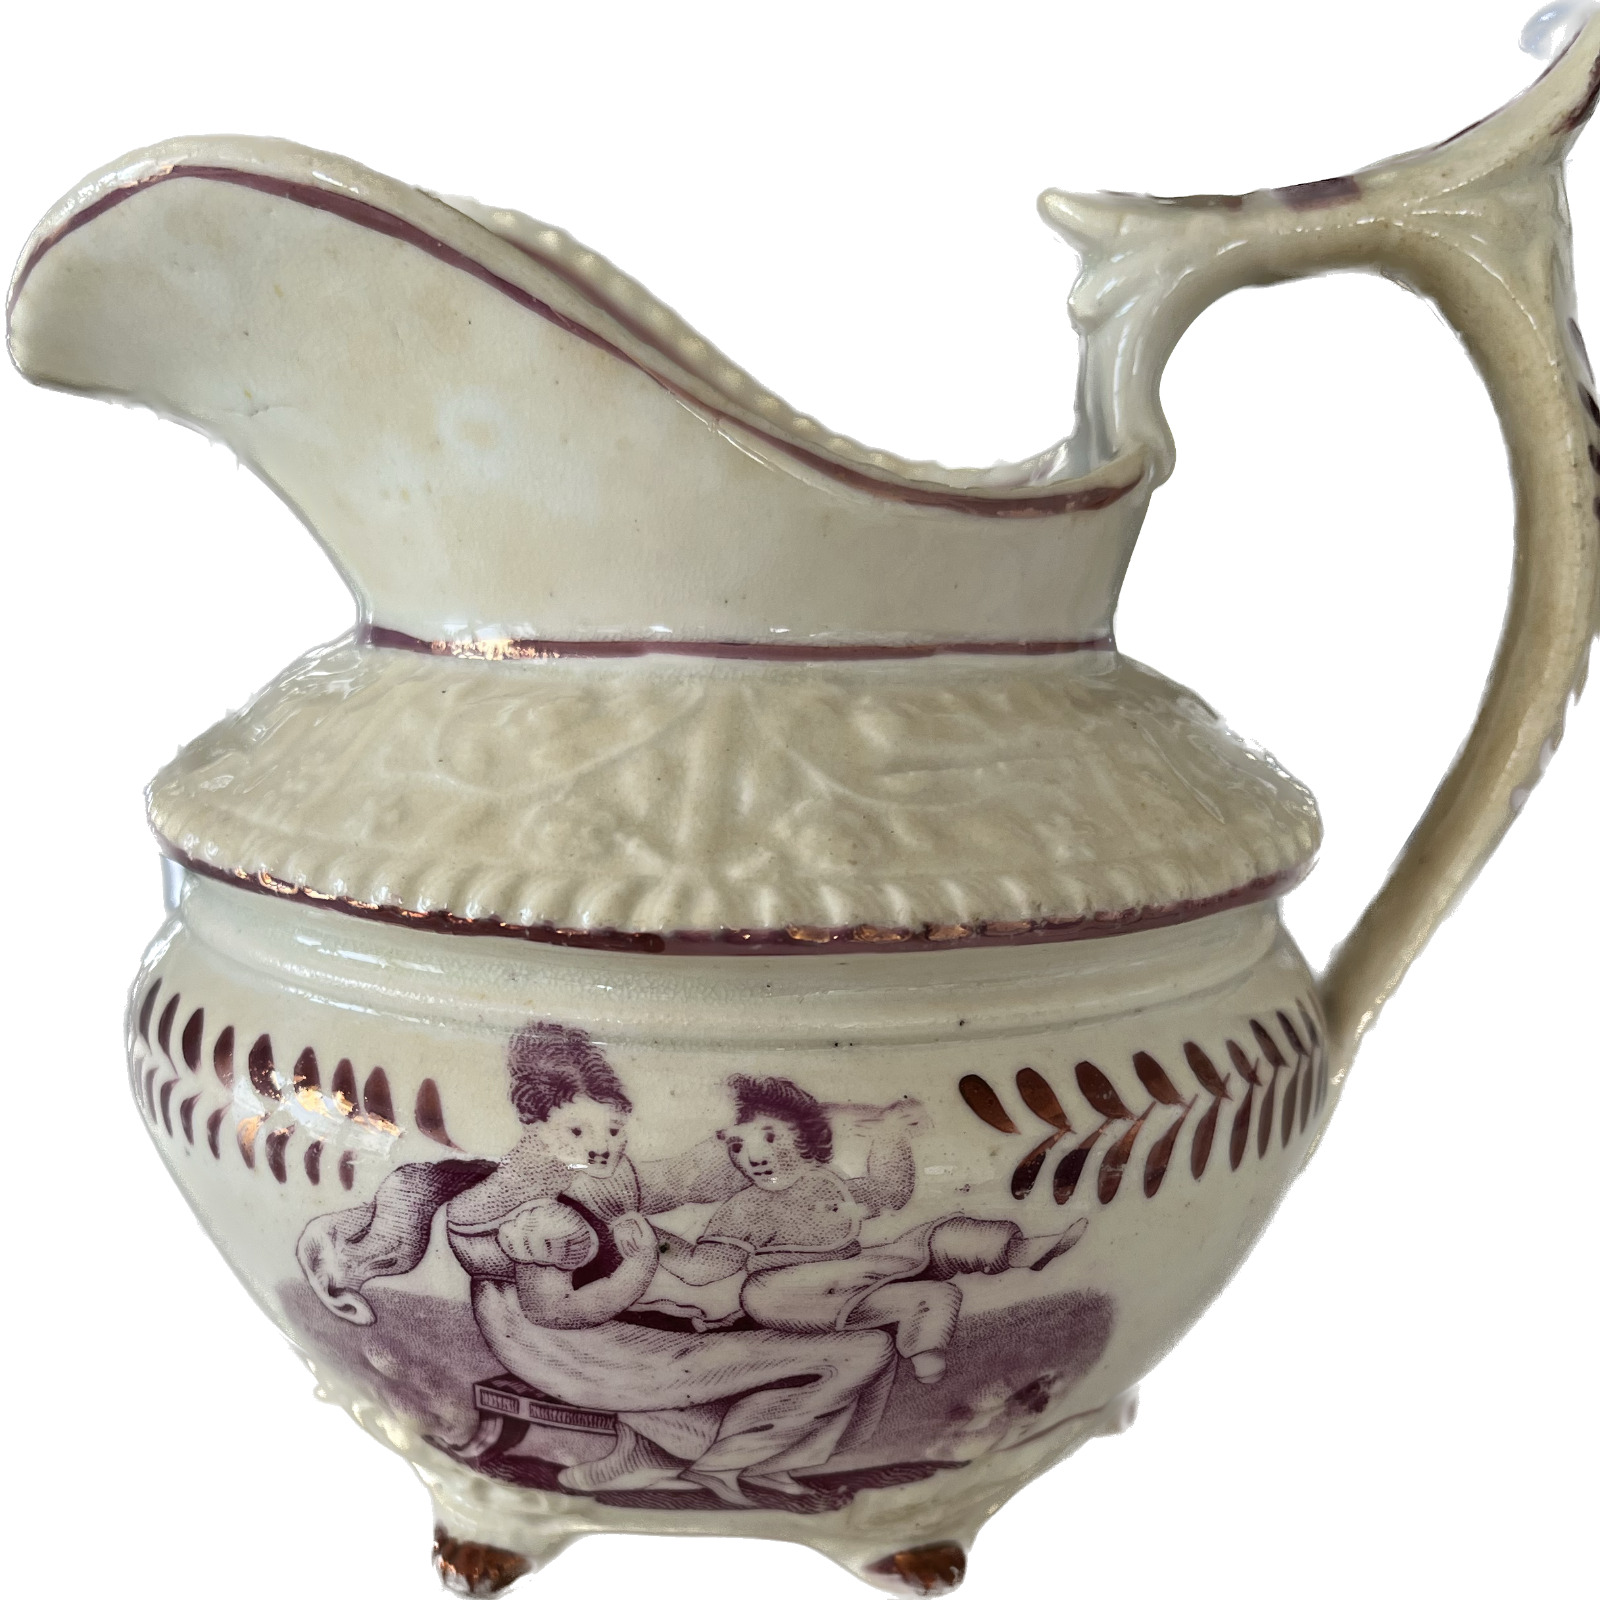 Rare Miles Mason Creamer with transfer printing of Mother and Child in soft pink